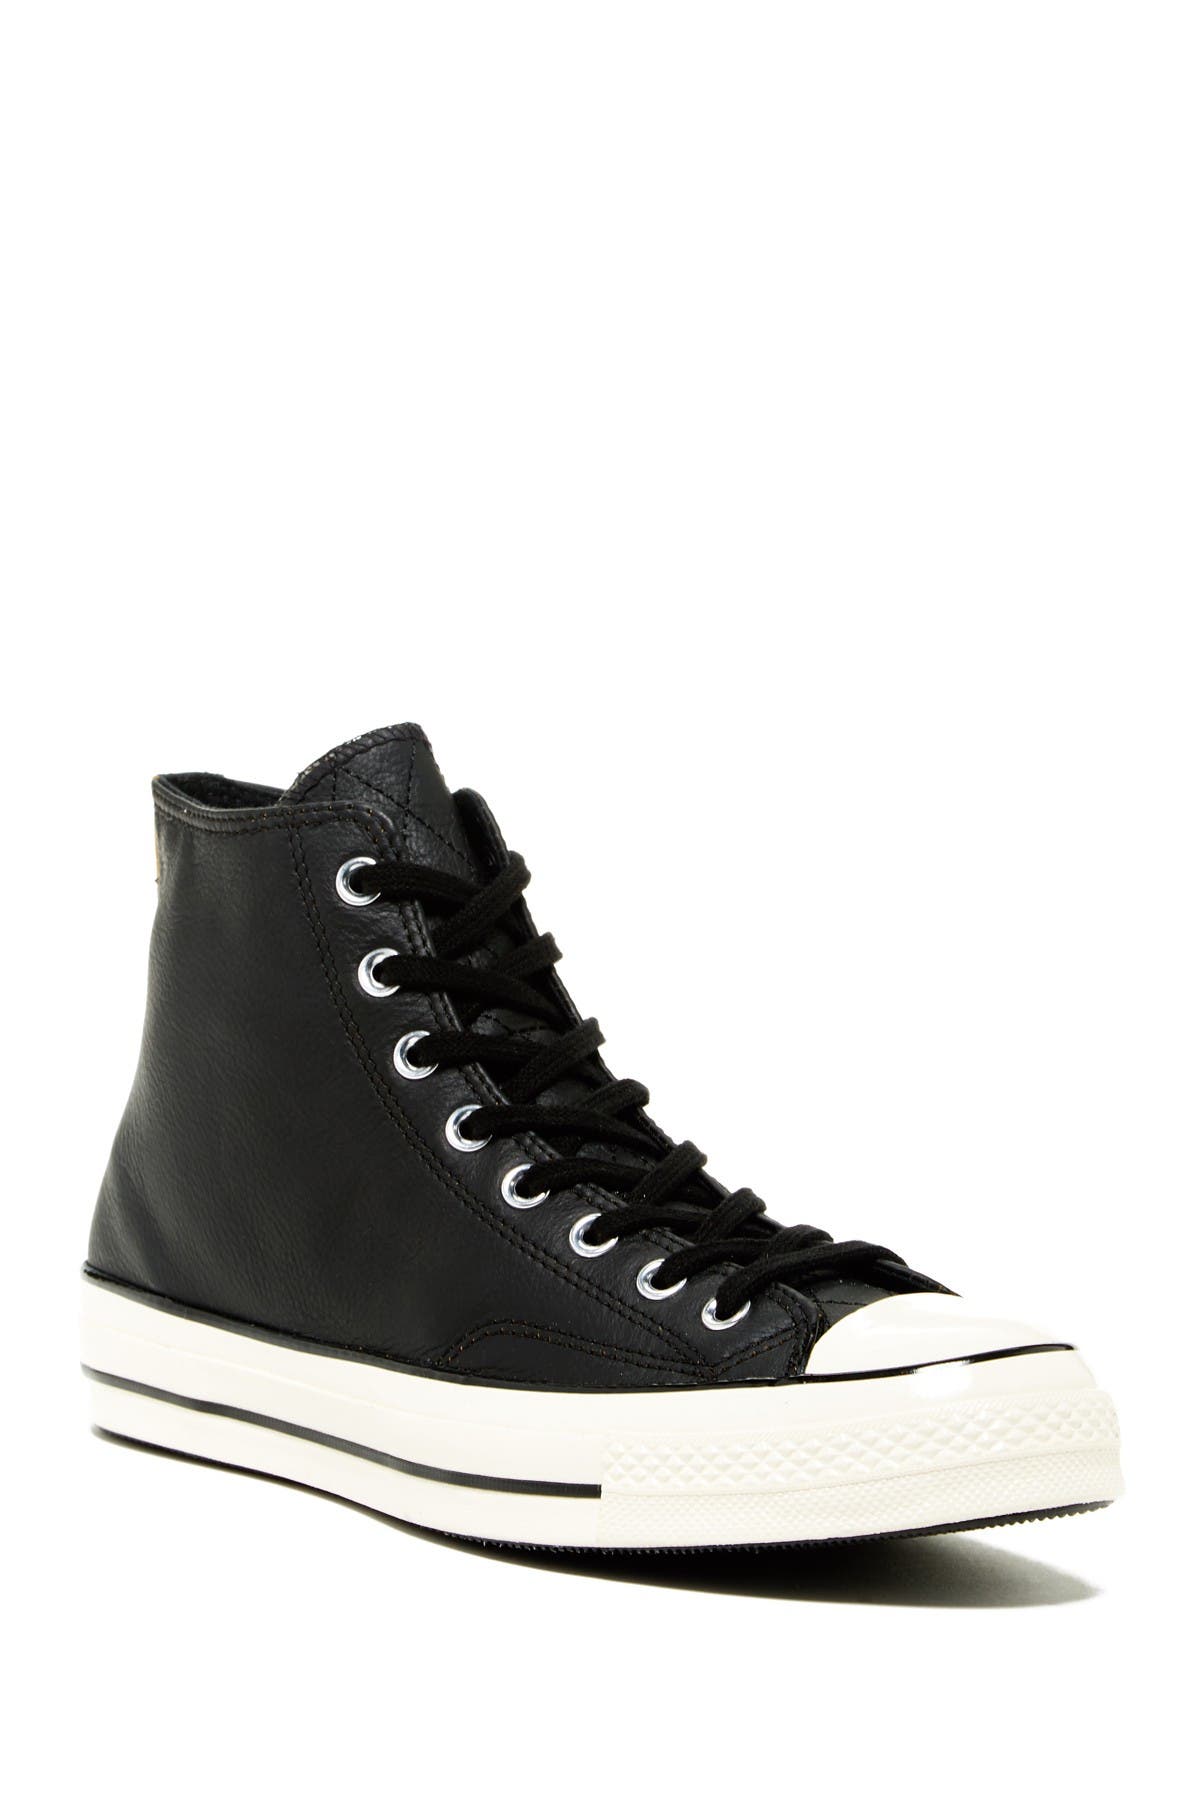 Converse | Chuck Taylor Leather High 